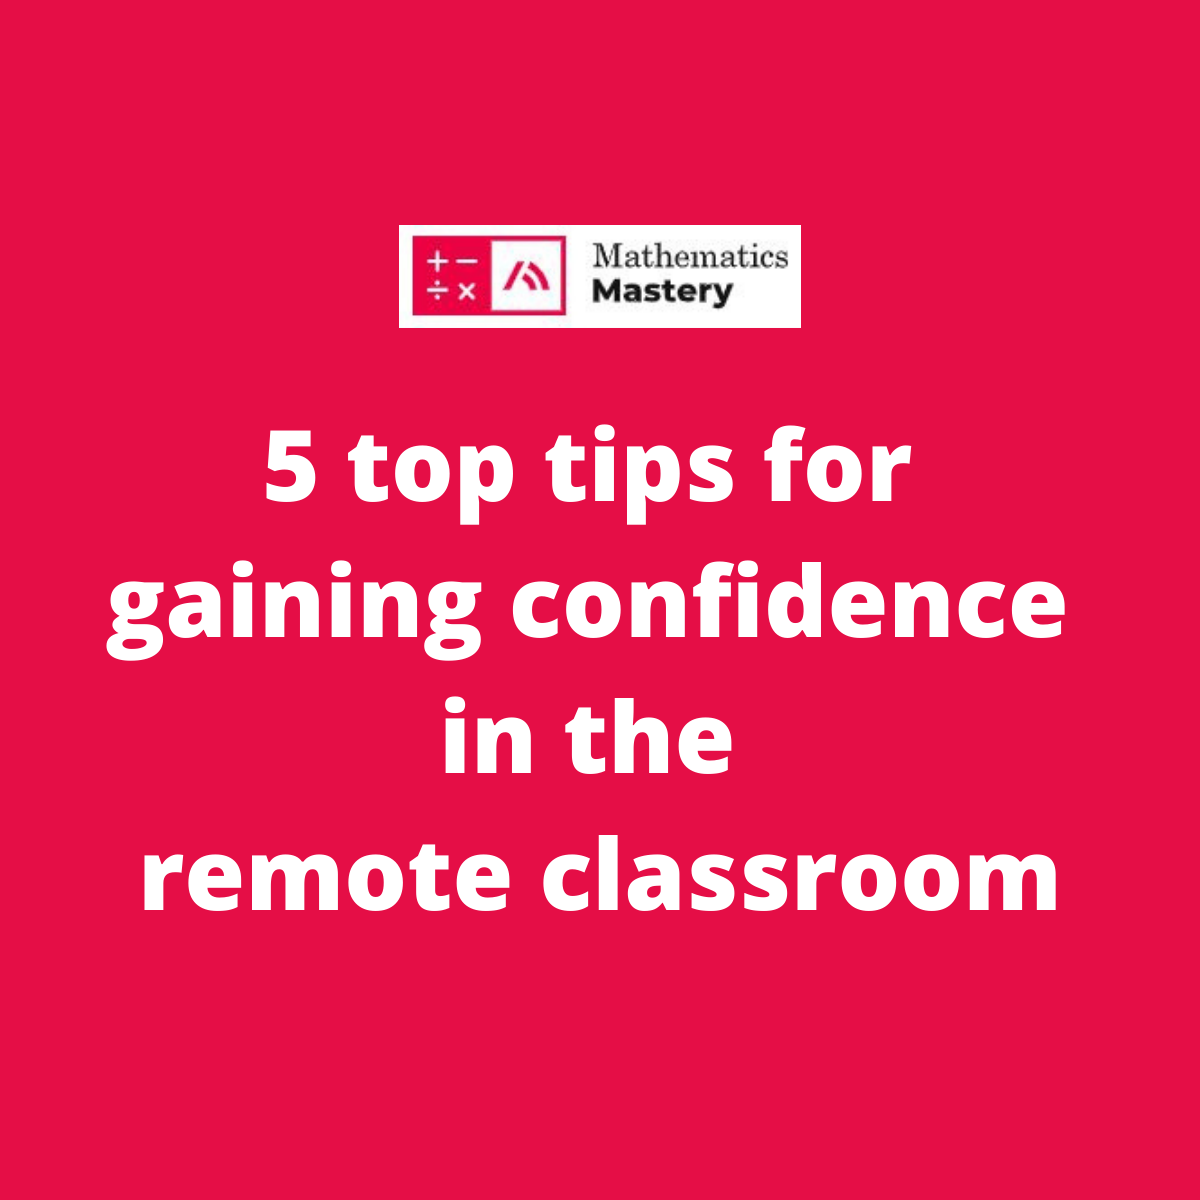 Gaining confidence in the remote classroom – 5 top tips